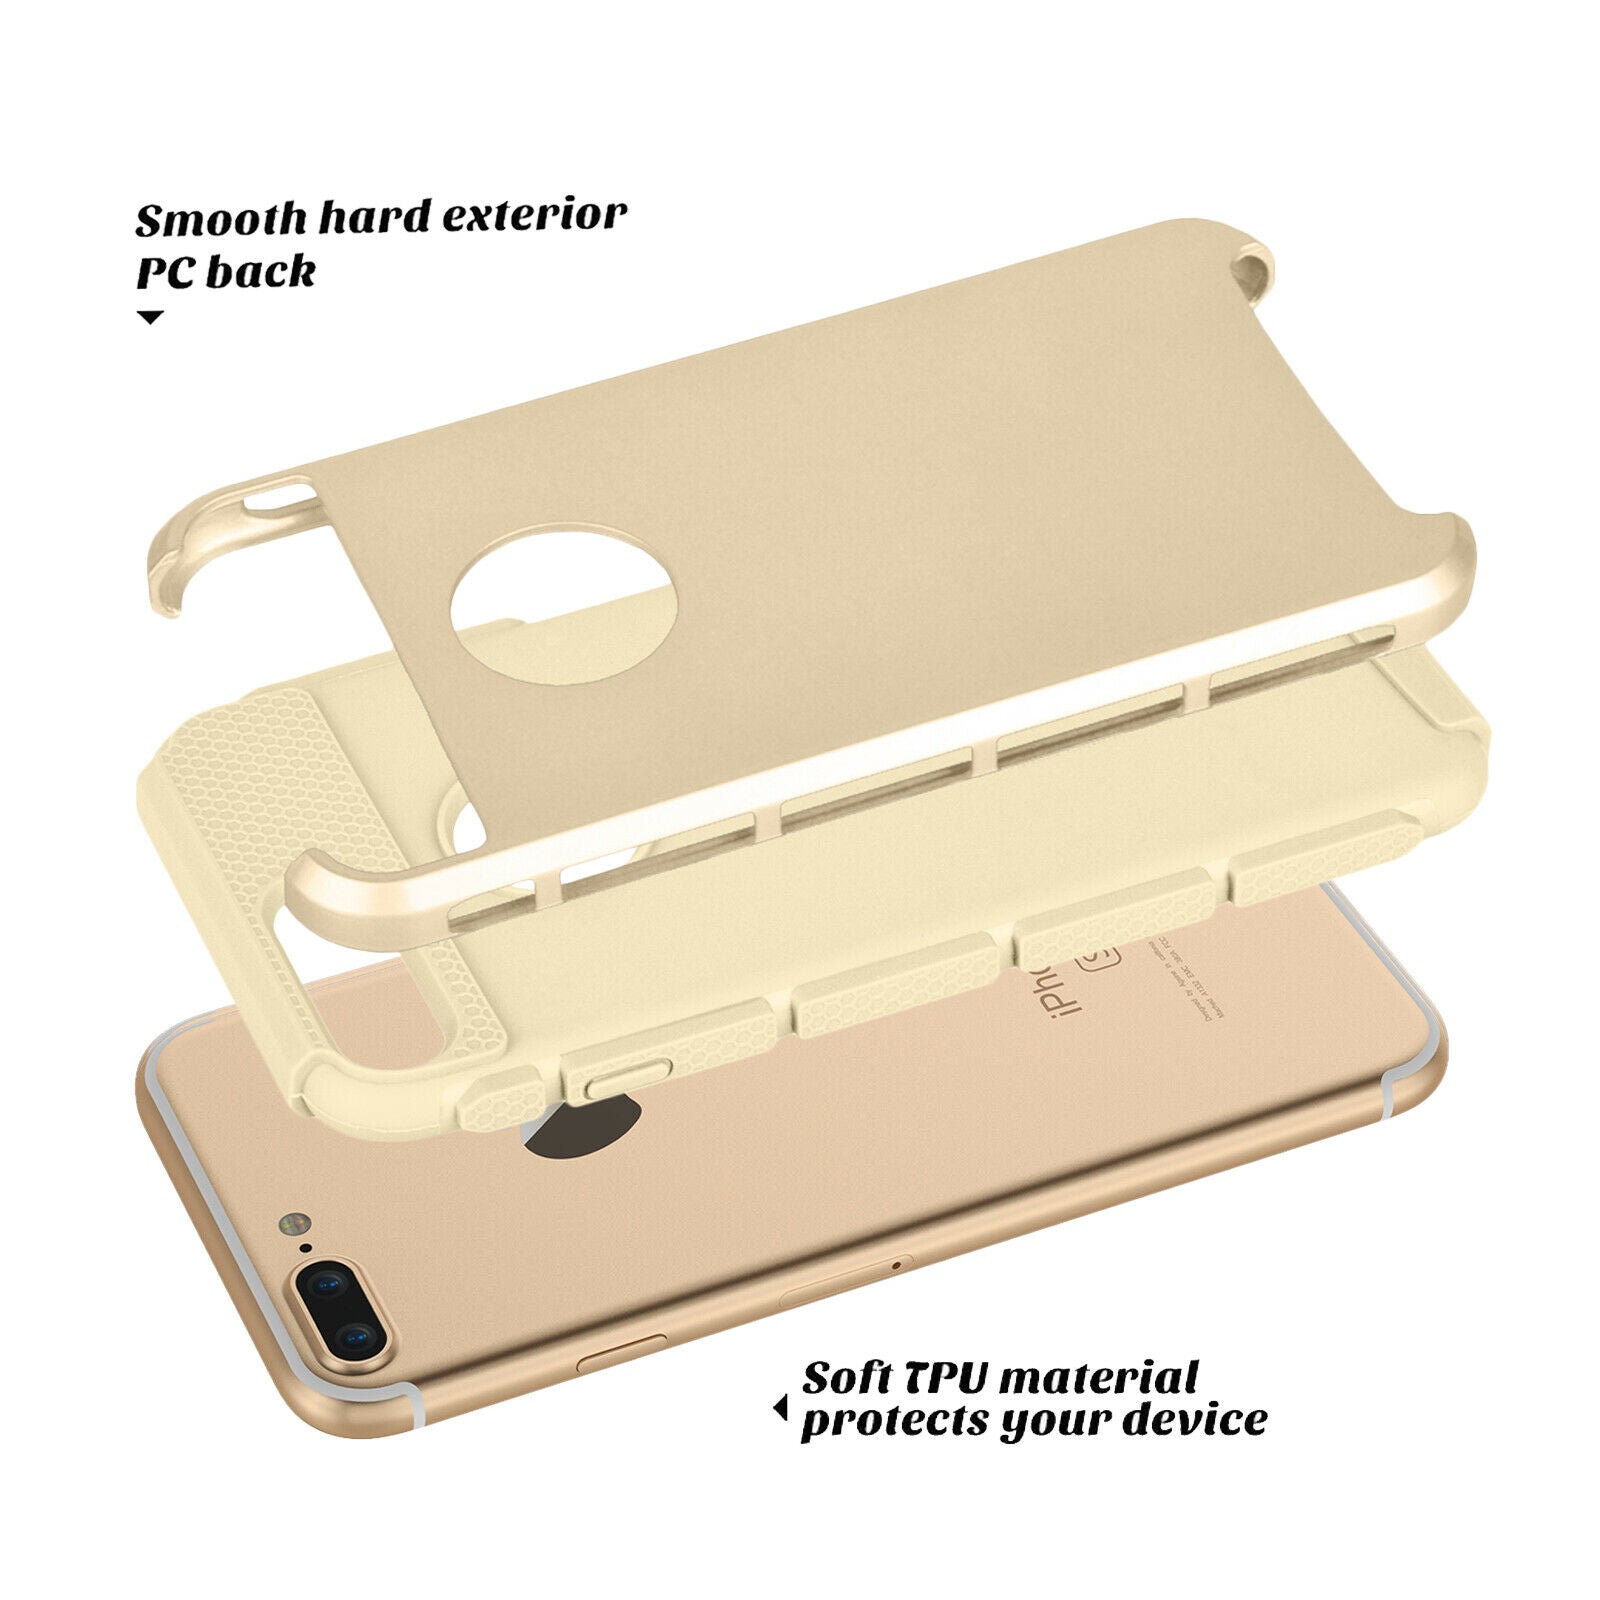 Case Shockproof Rugged Rubber Cover For iPhone - carolay.co